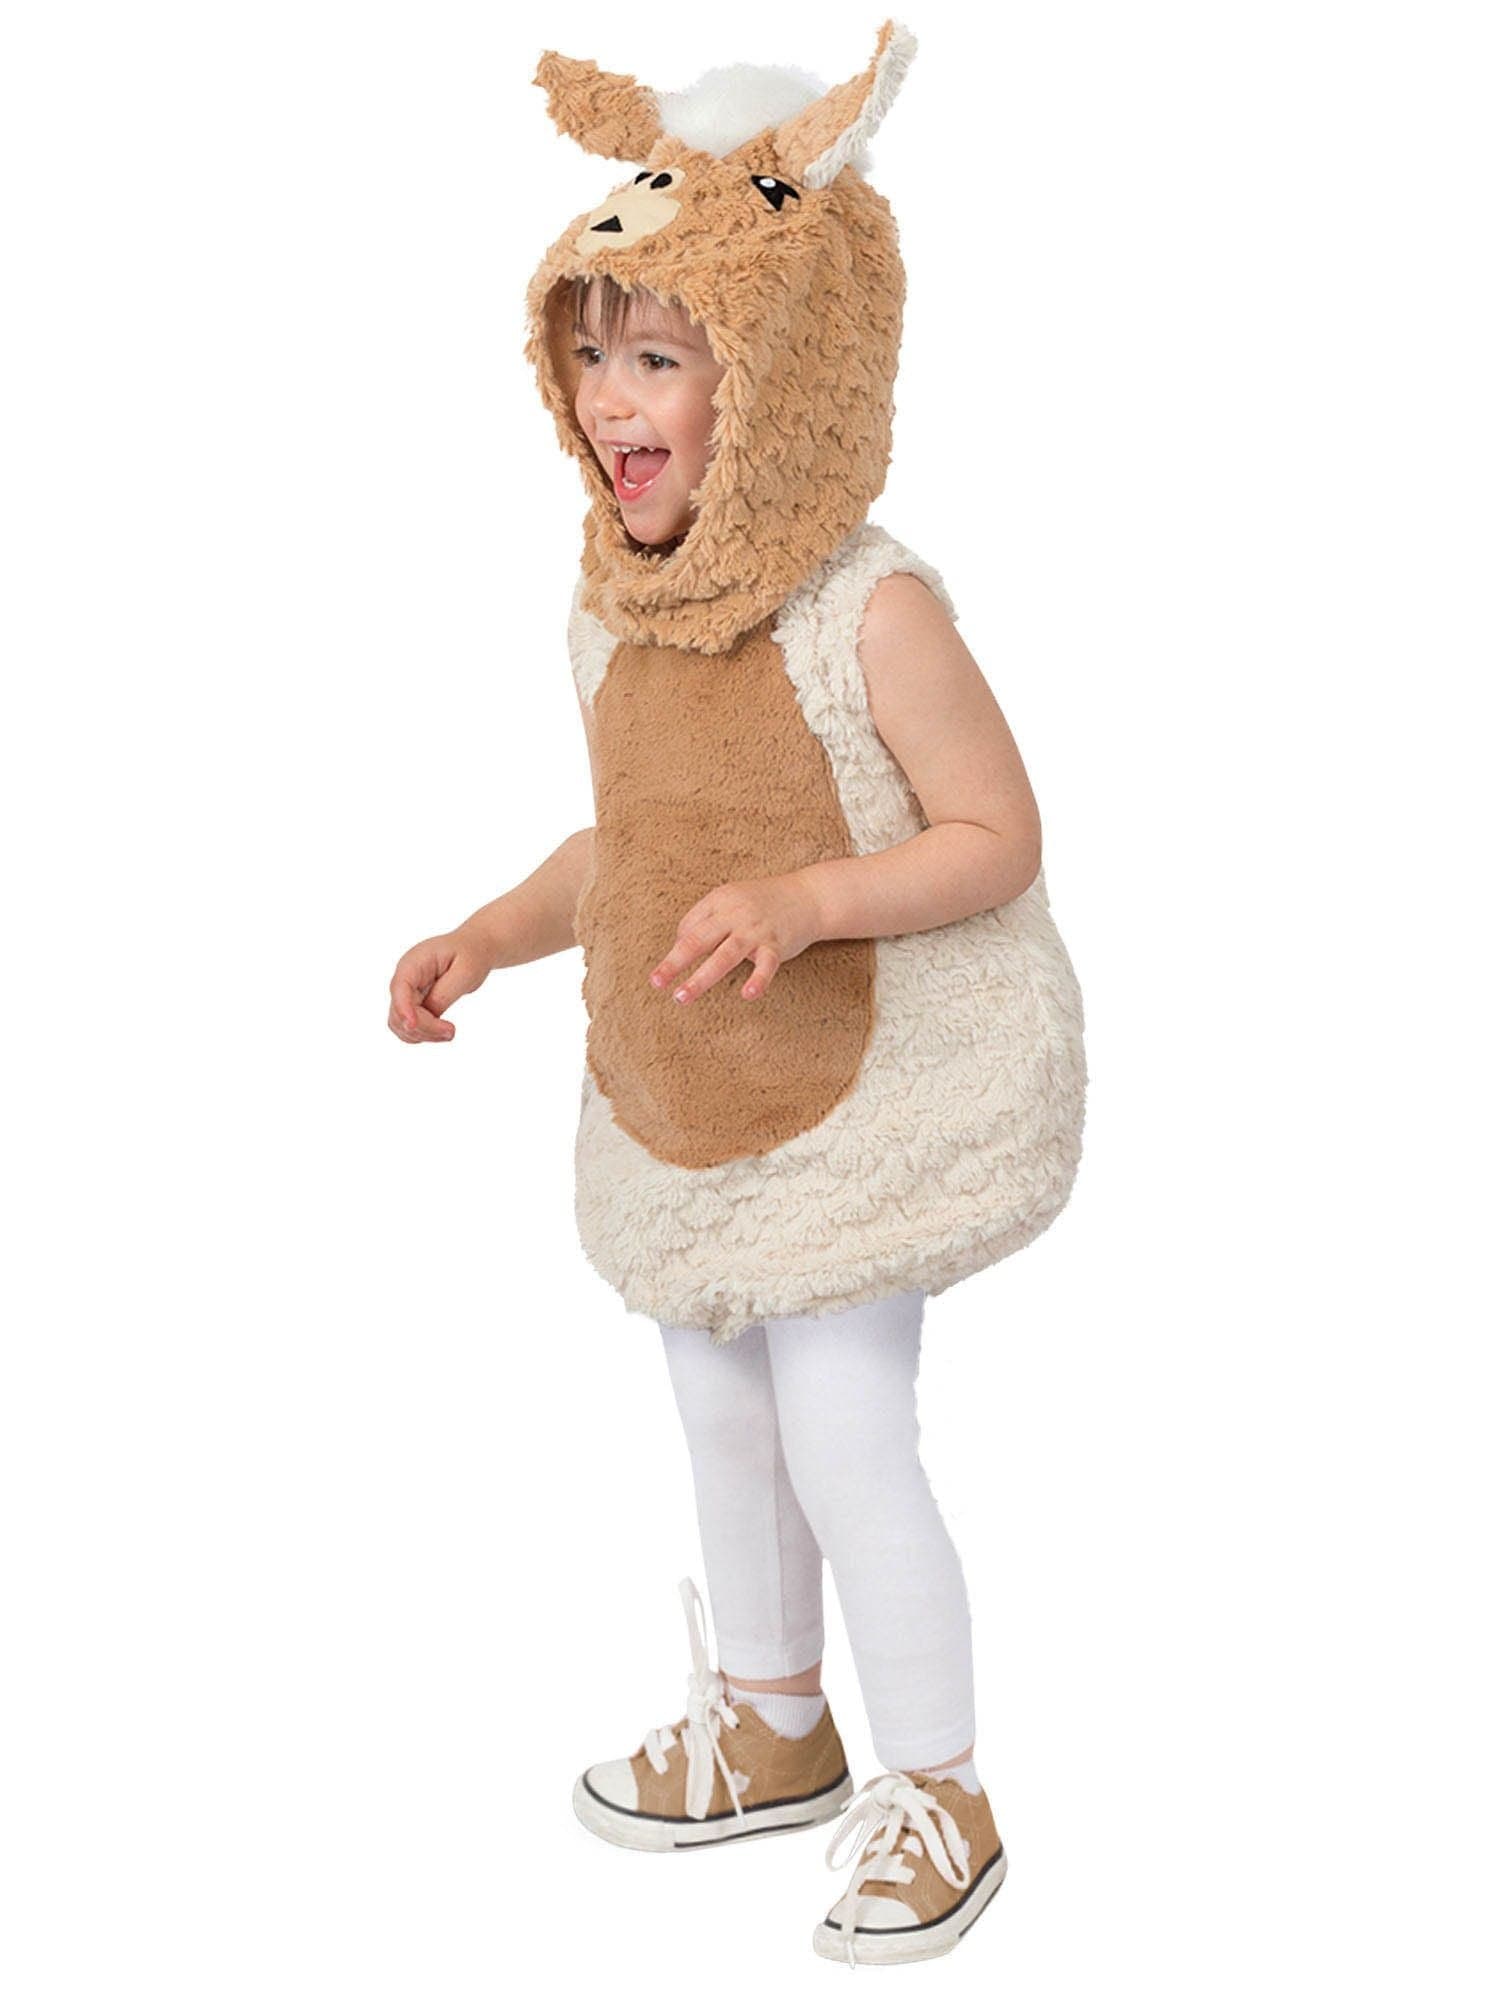 Baby/Toddler Lenny The Llama Costume - costumes.com